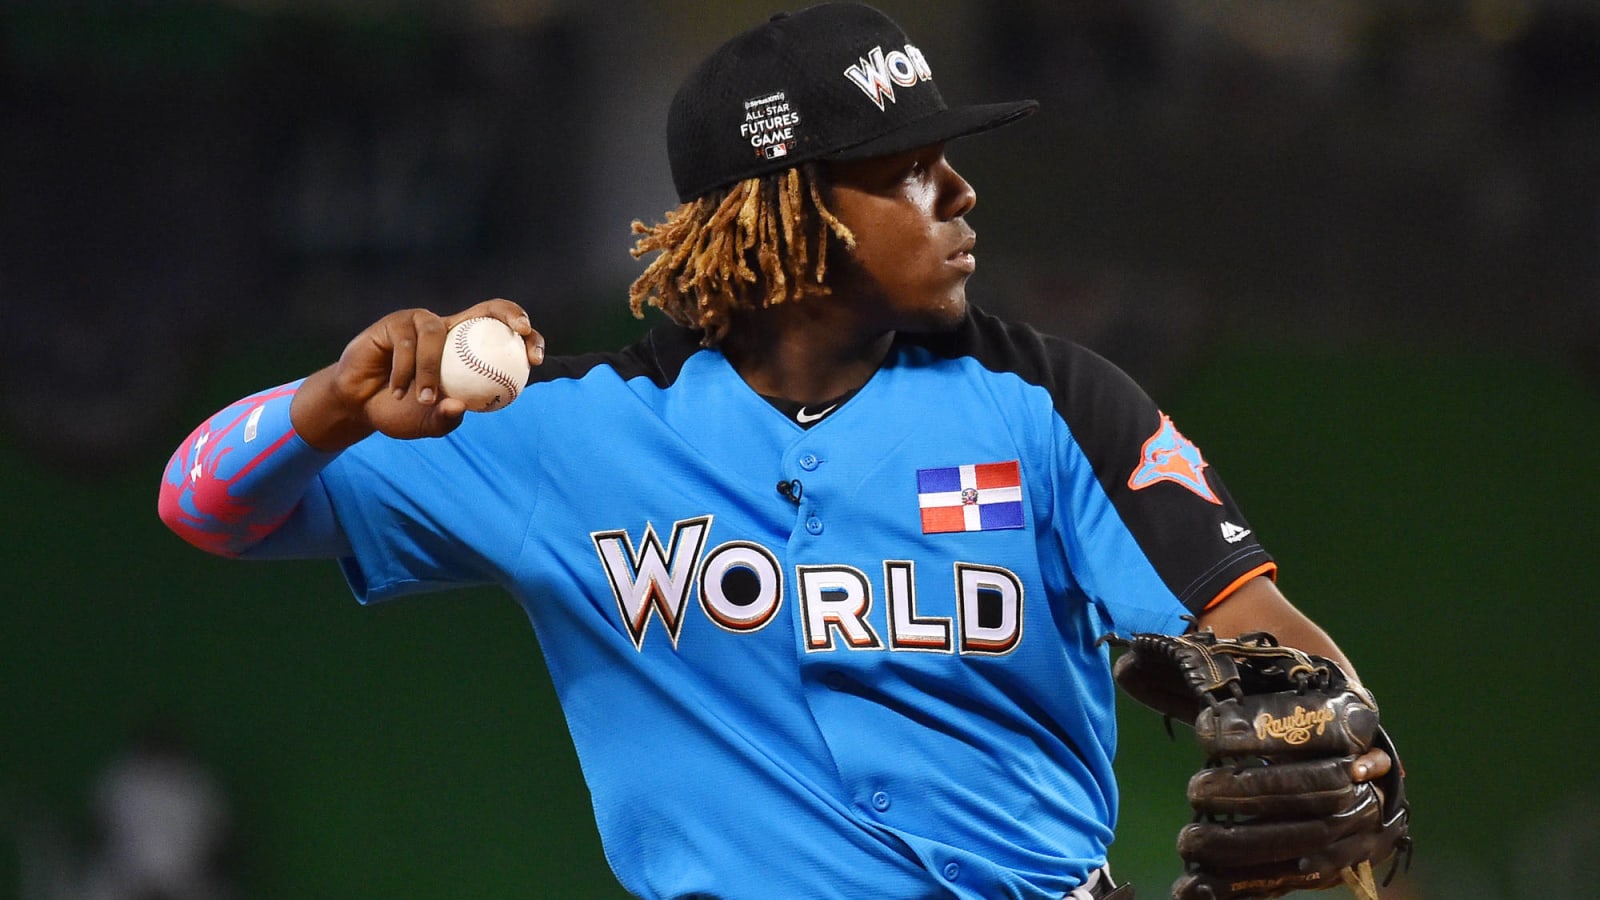 Pedro Martinez: Vladimir Guerrero Jr. will be just as special as his father